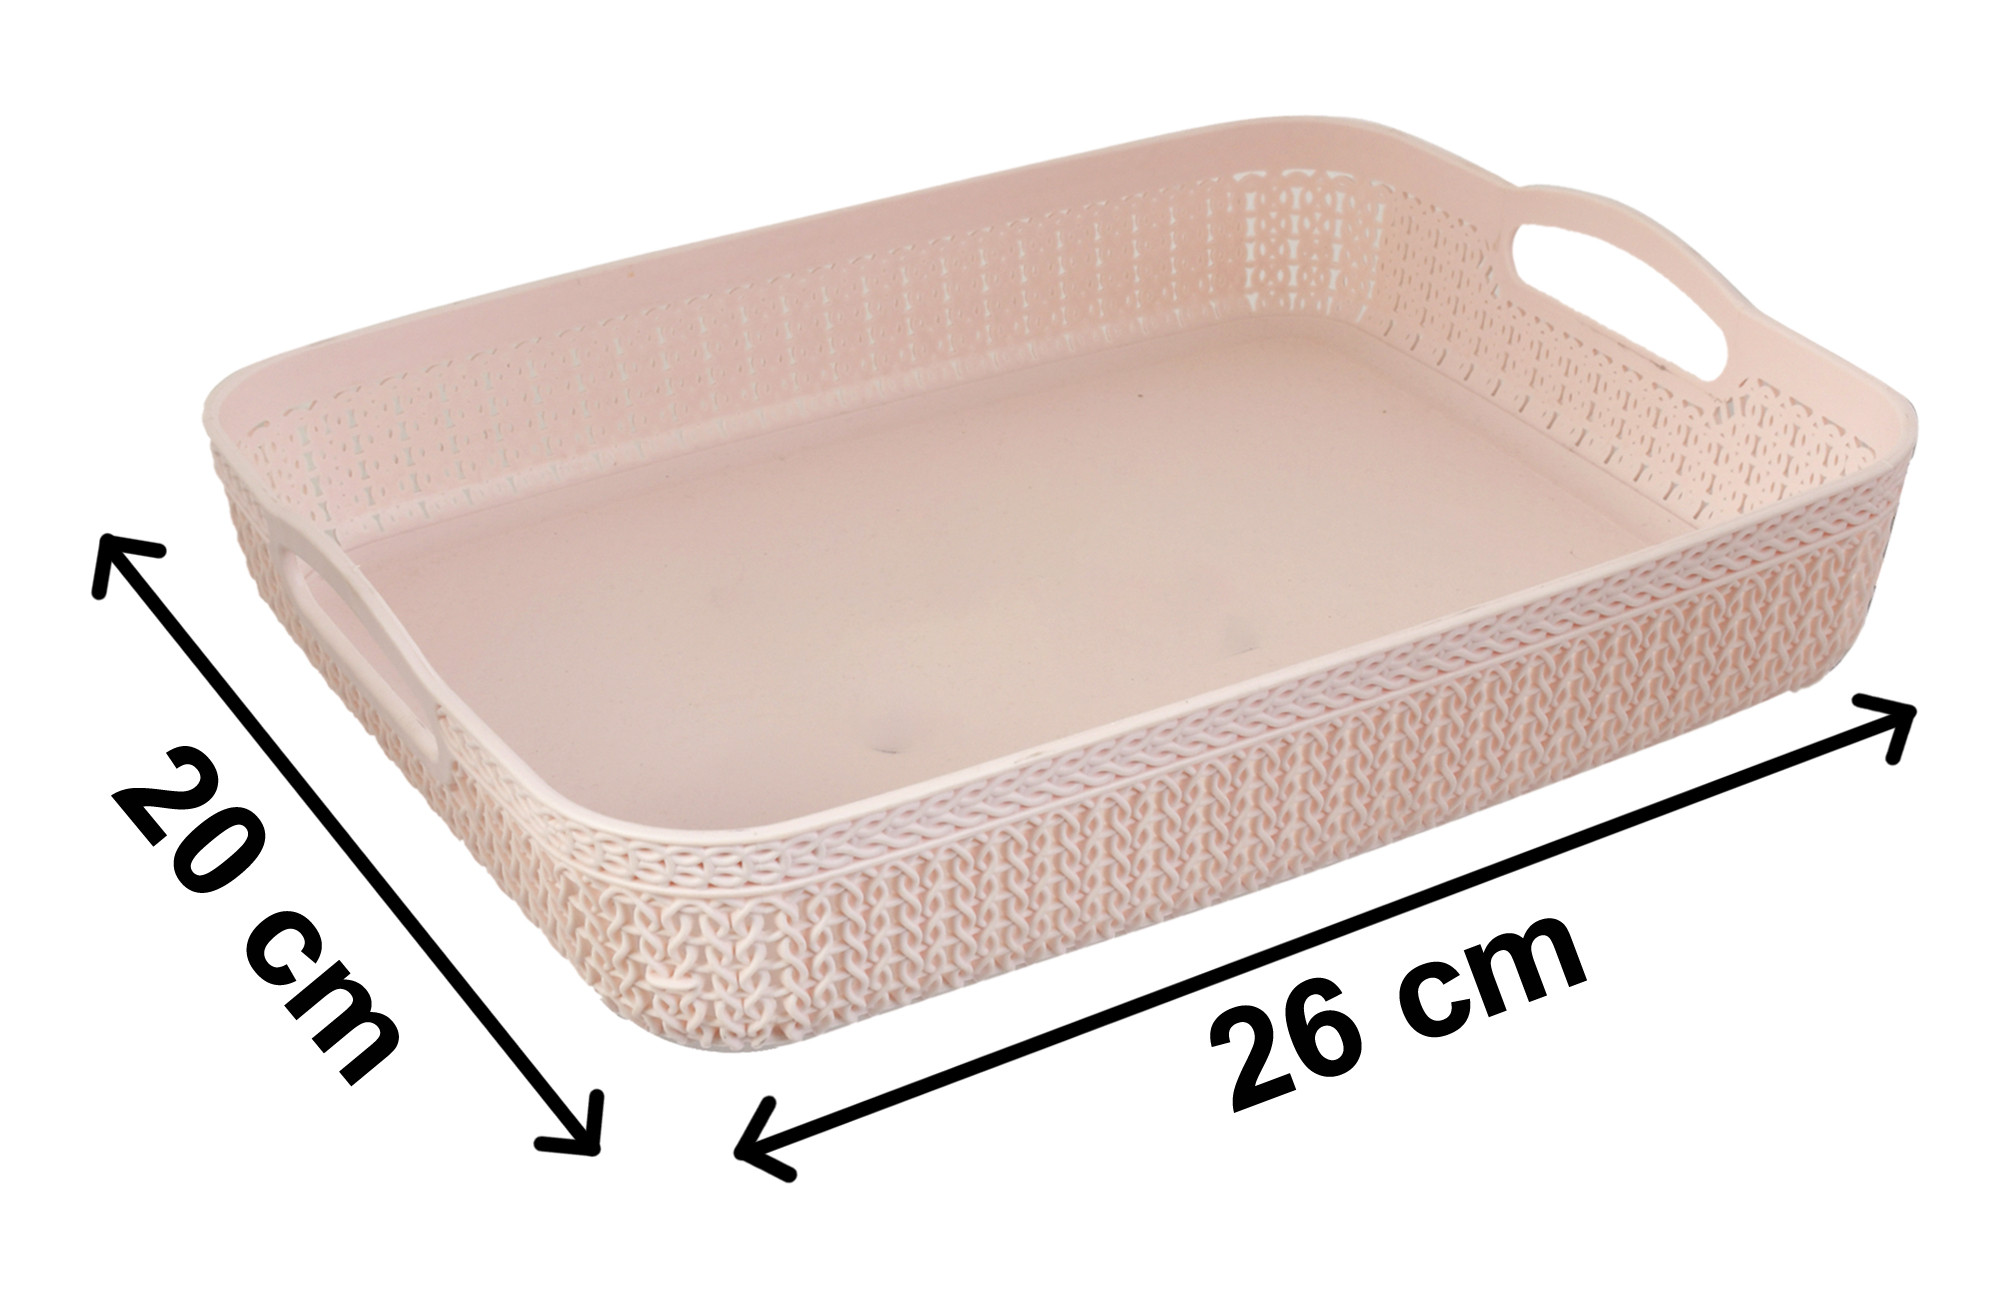 Kuber Industries Q-3,4 Unbreakable 4 Pieces Plastic Multipurpose Small & Large Size Flexible Storage Baskets/Fruit Vegetable Bathroom Stationary Home Basket with Handles,Multi